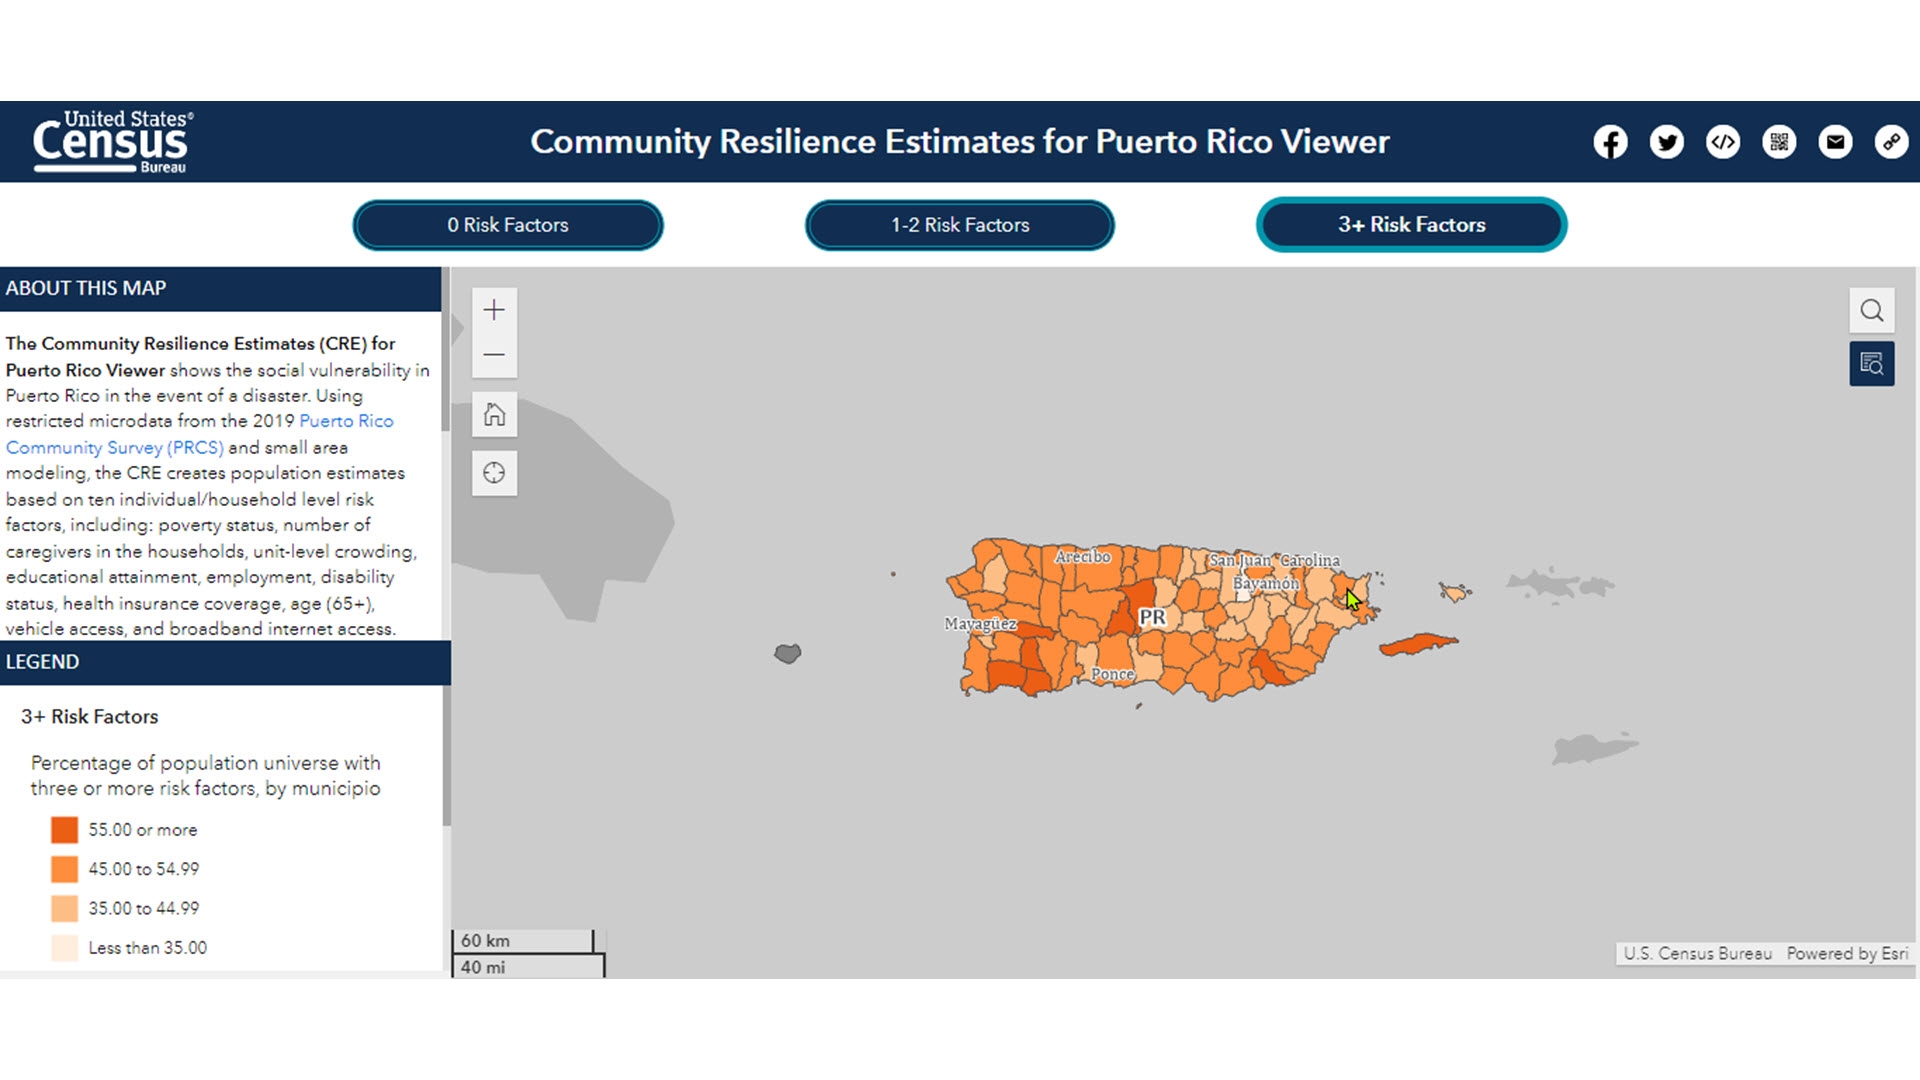 Community Resilience Estimates for Puerto Rico Viewer